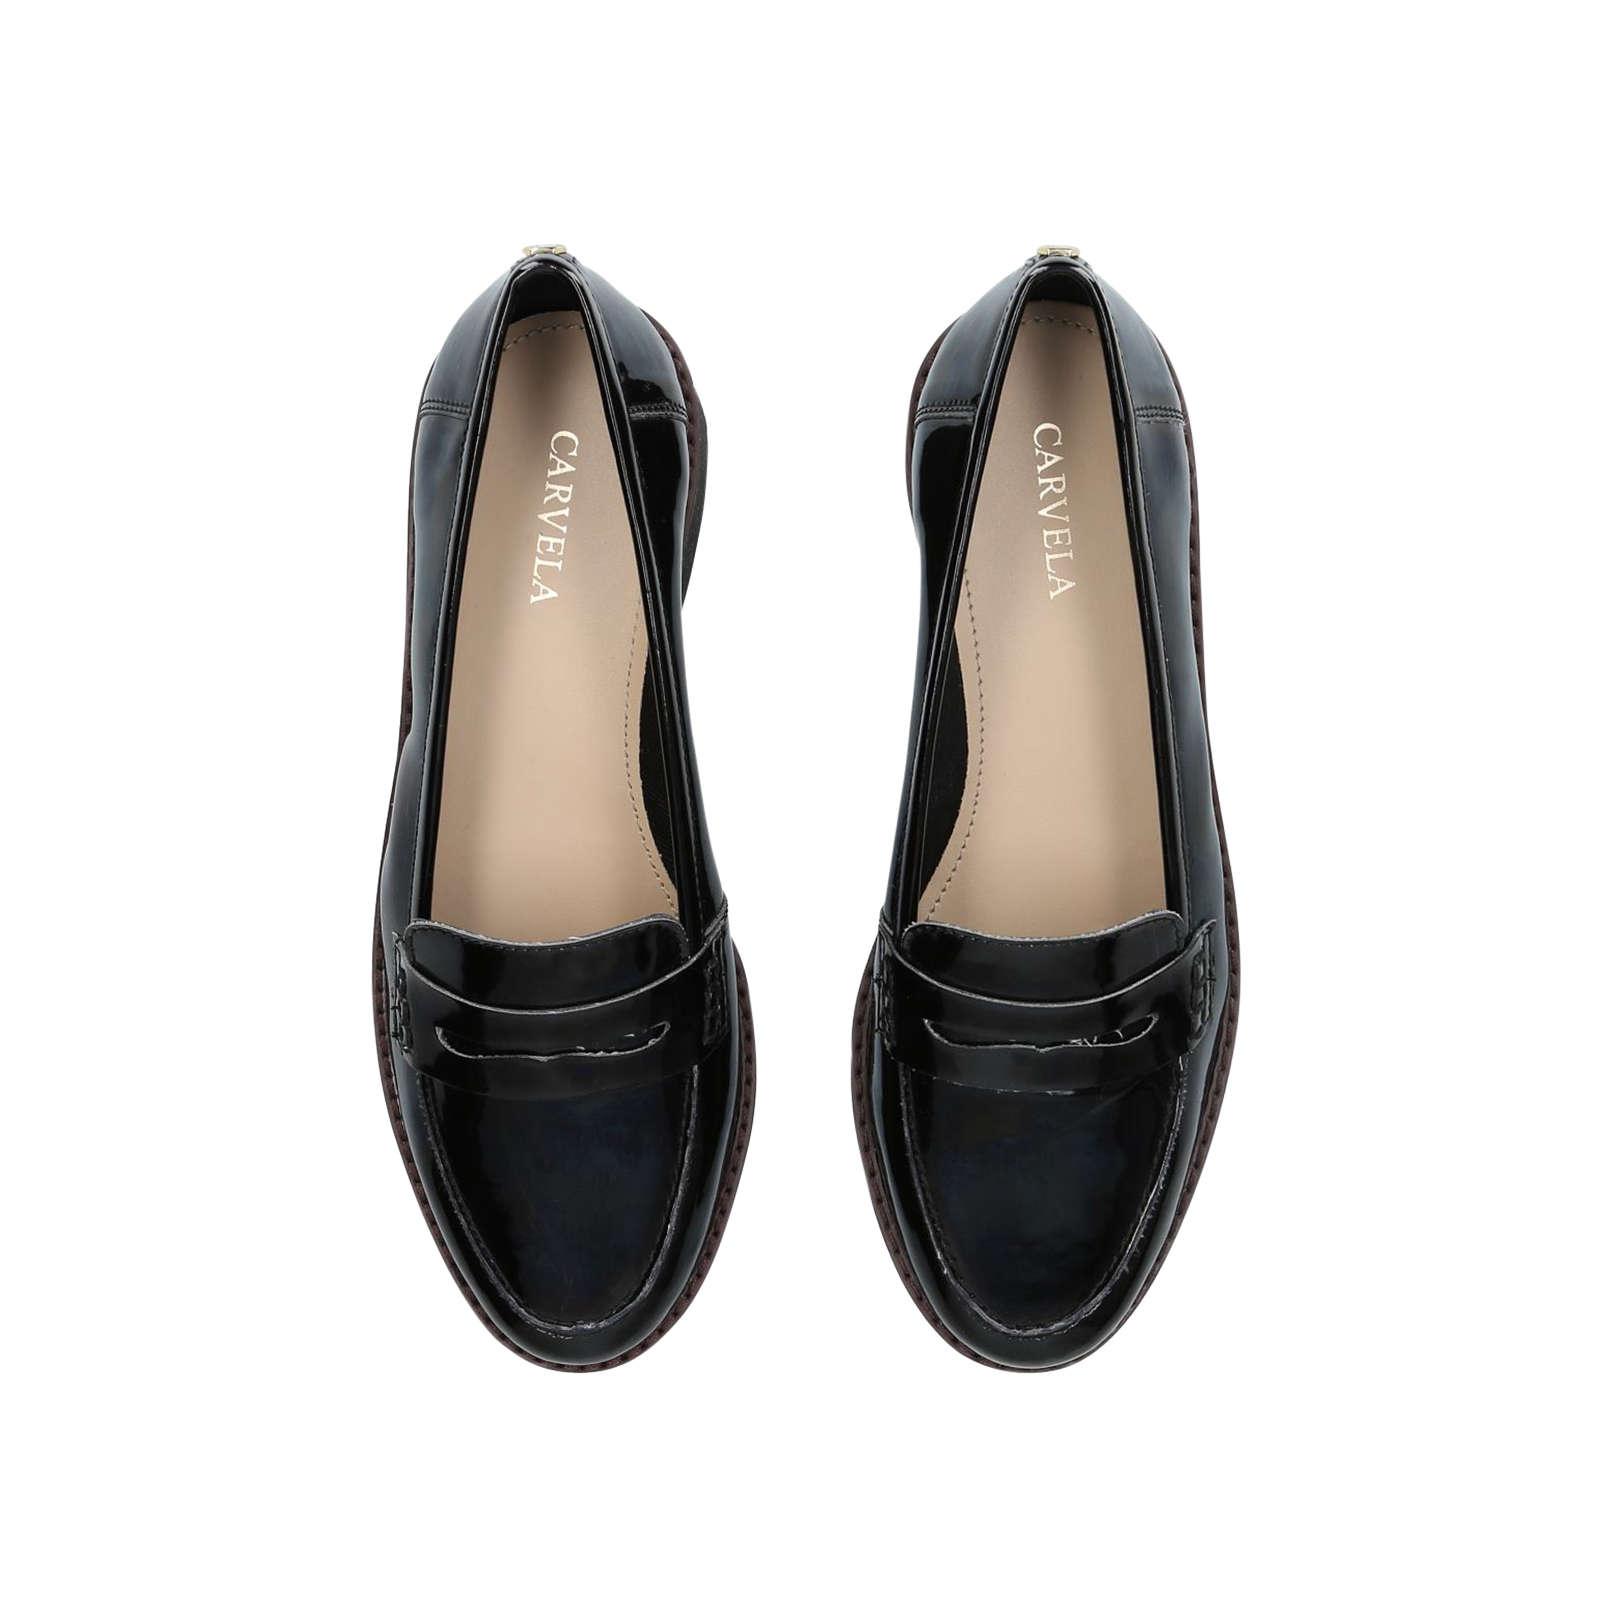 Carvela Kurt Geiger Synthetic Patent Loafer With Penny Trim in Black - Lyst